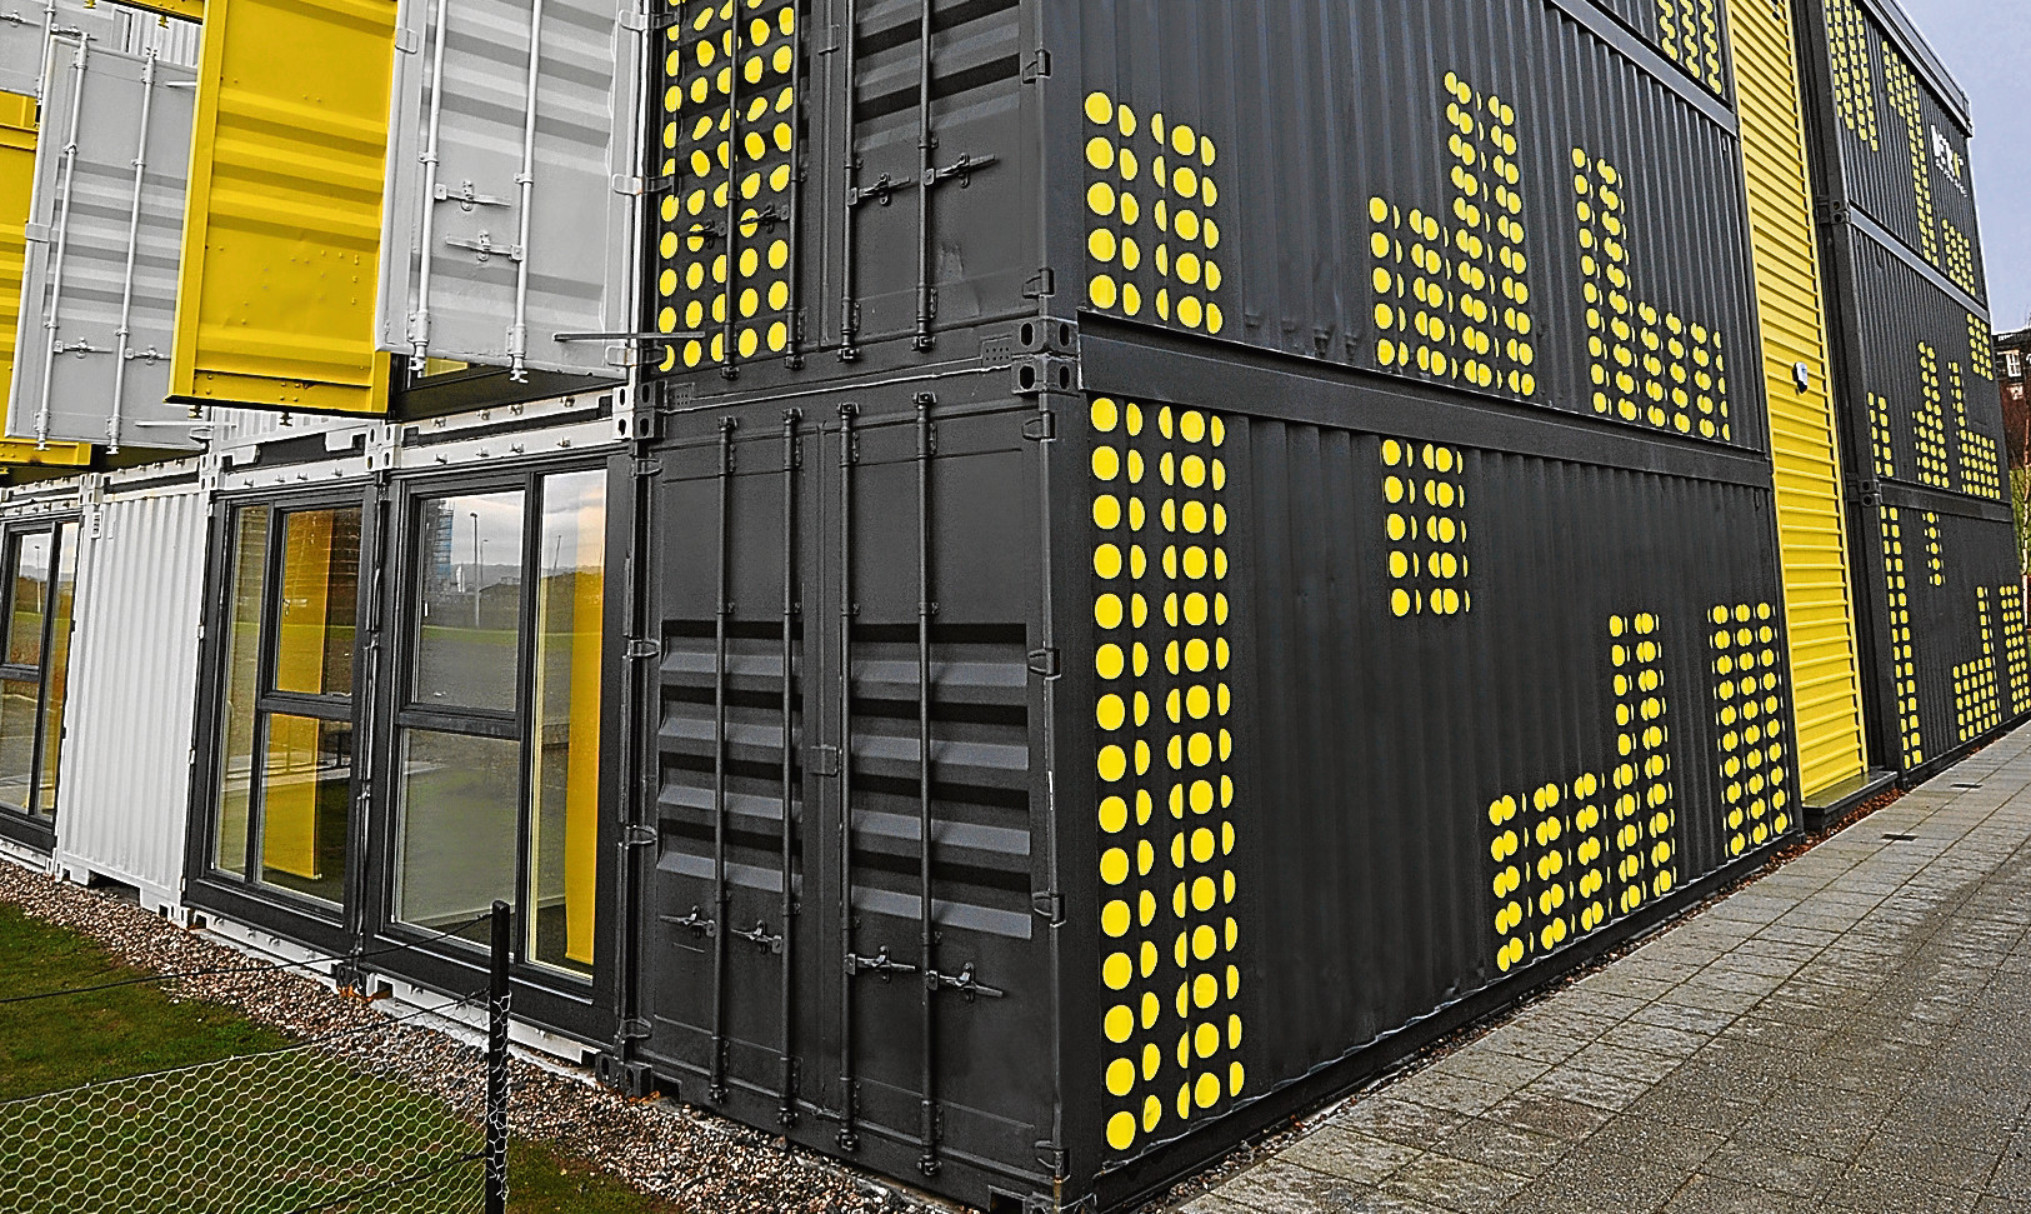 The District 10 suite of offices made from shipping containers at Seabraes, Dundee. Picture: Kim Cessford.